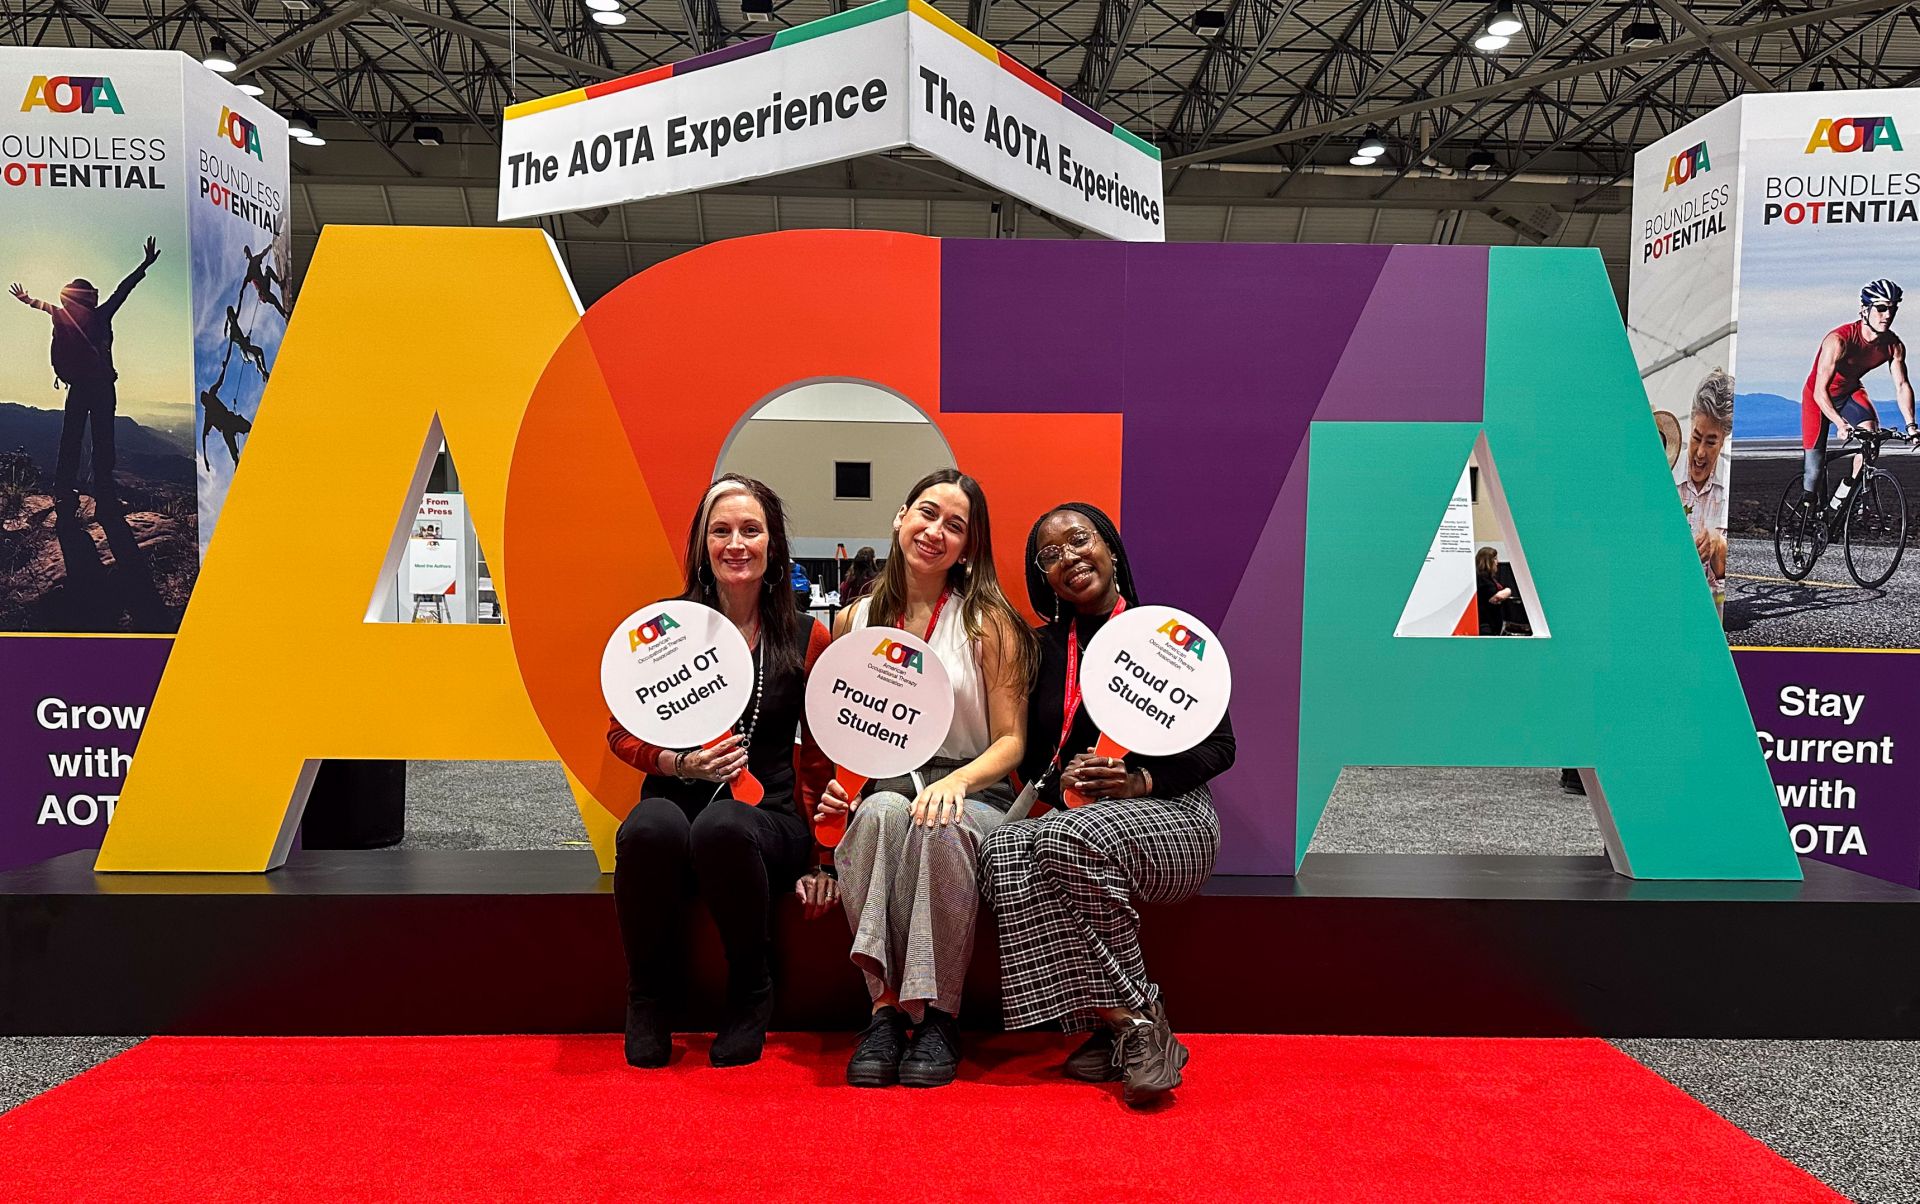 Three students smiling in front of large AOTA sign